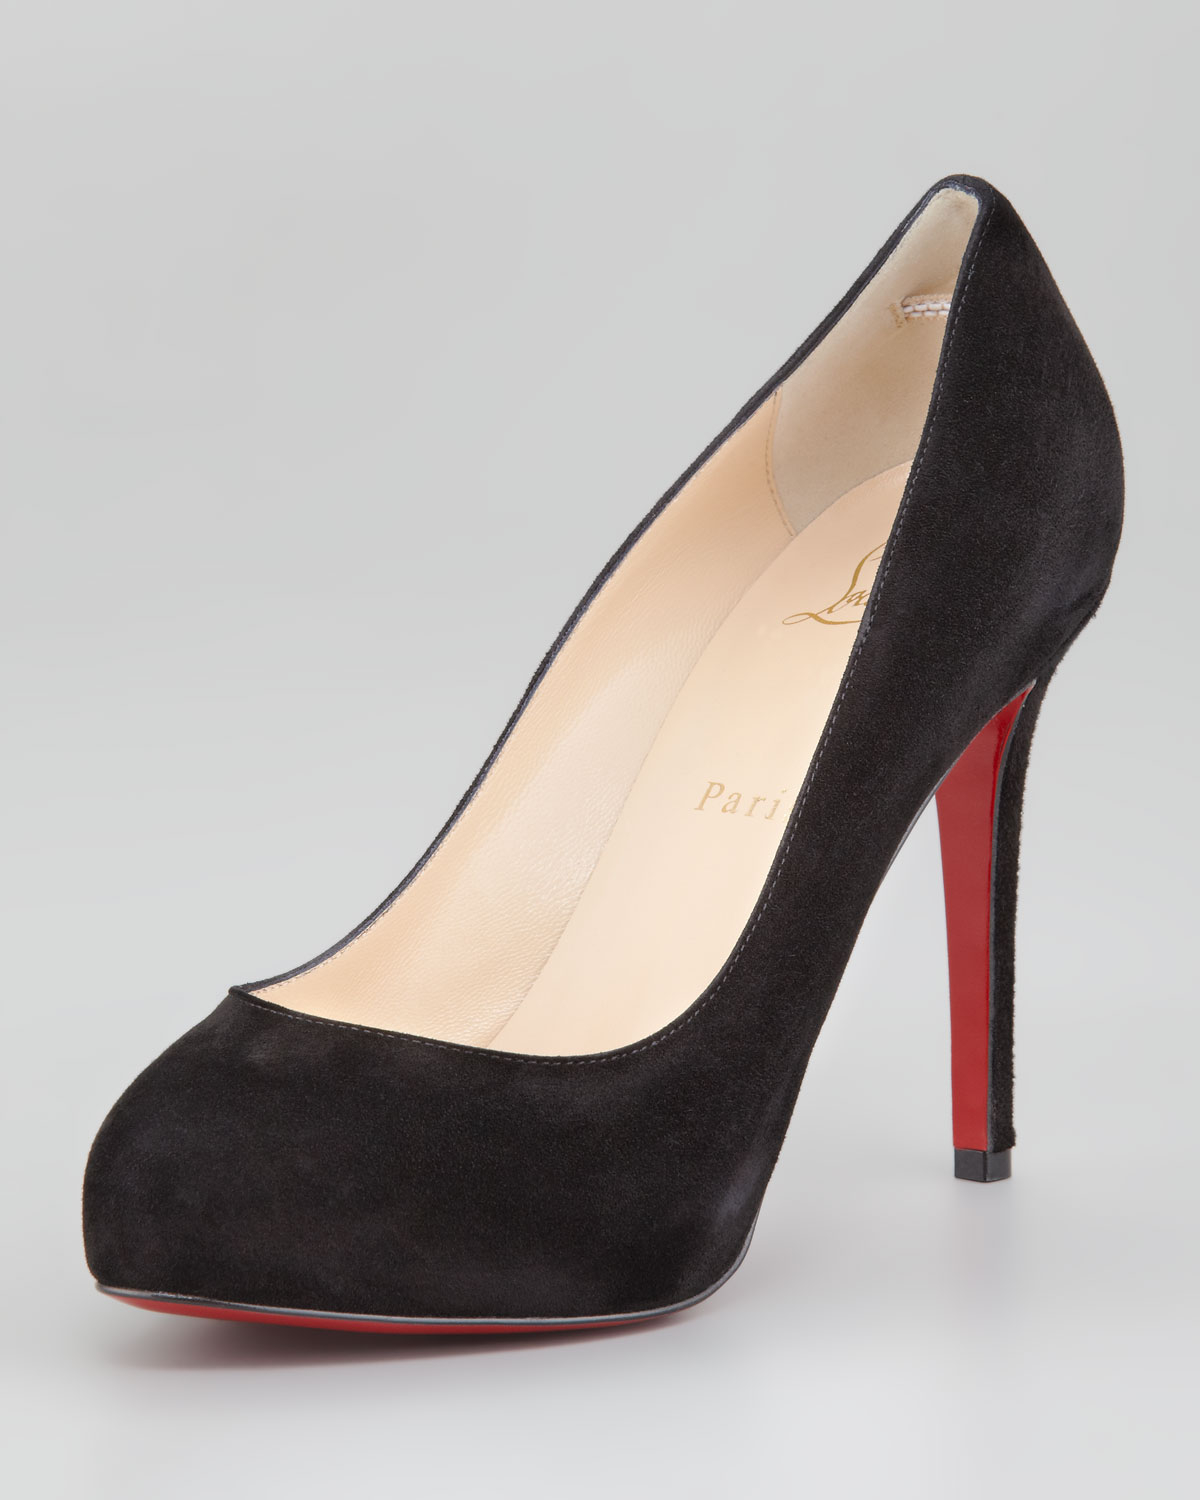 Lyst - Christian Louboutin New Declic Suede Red Sole Pump in Black